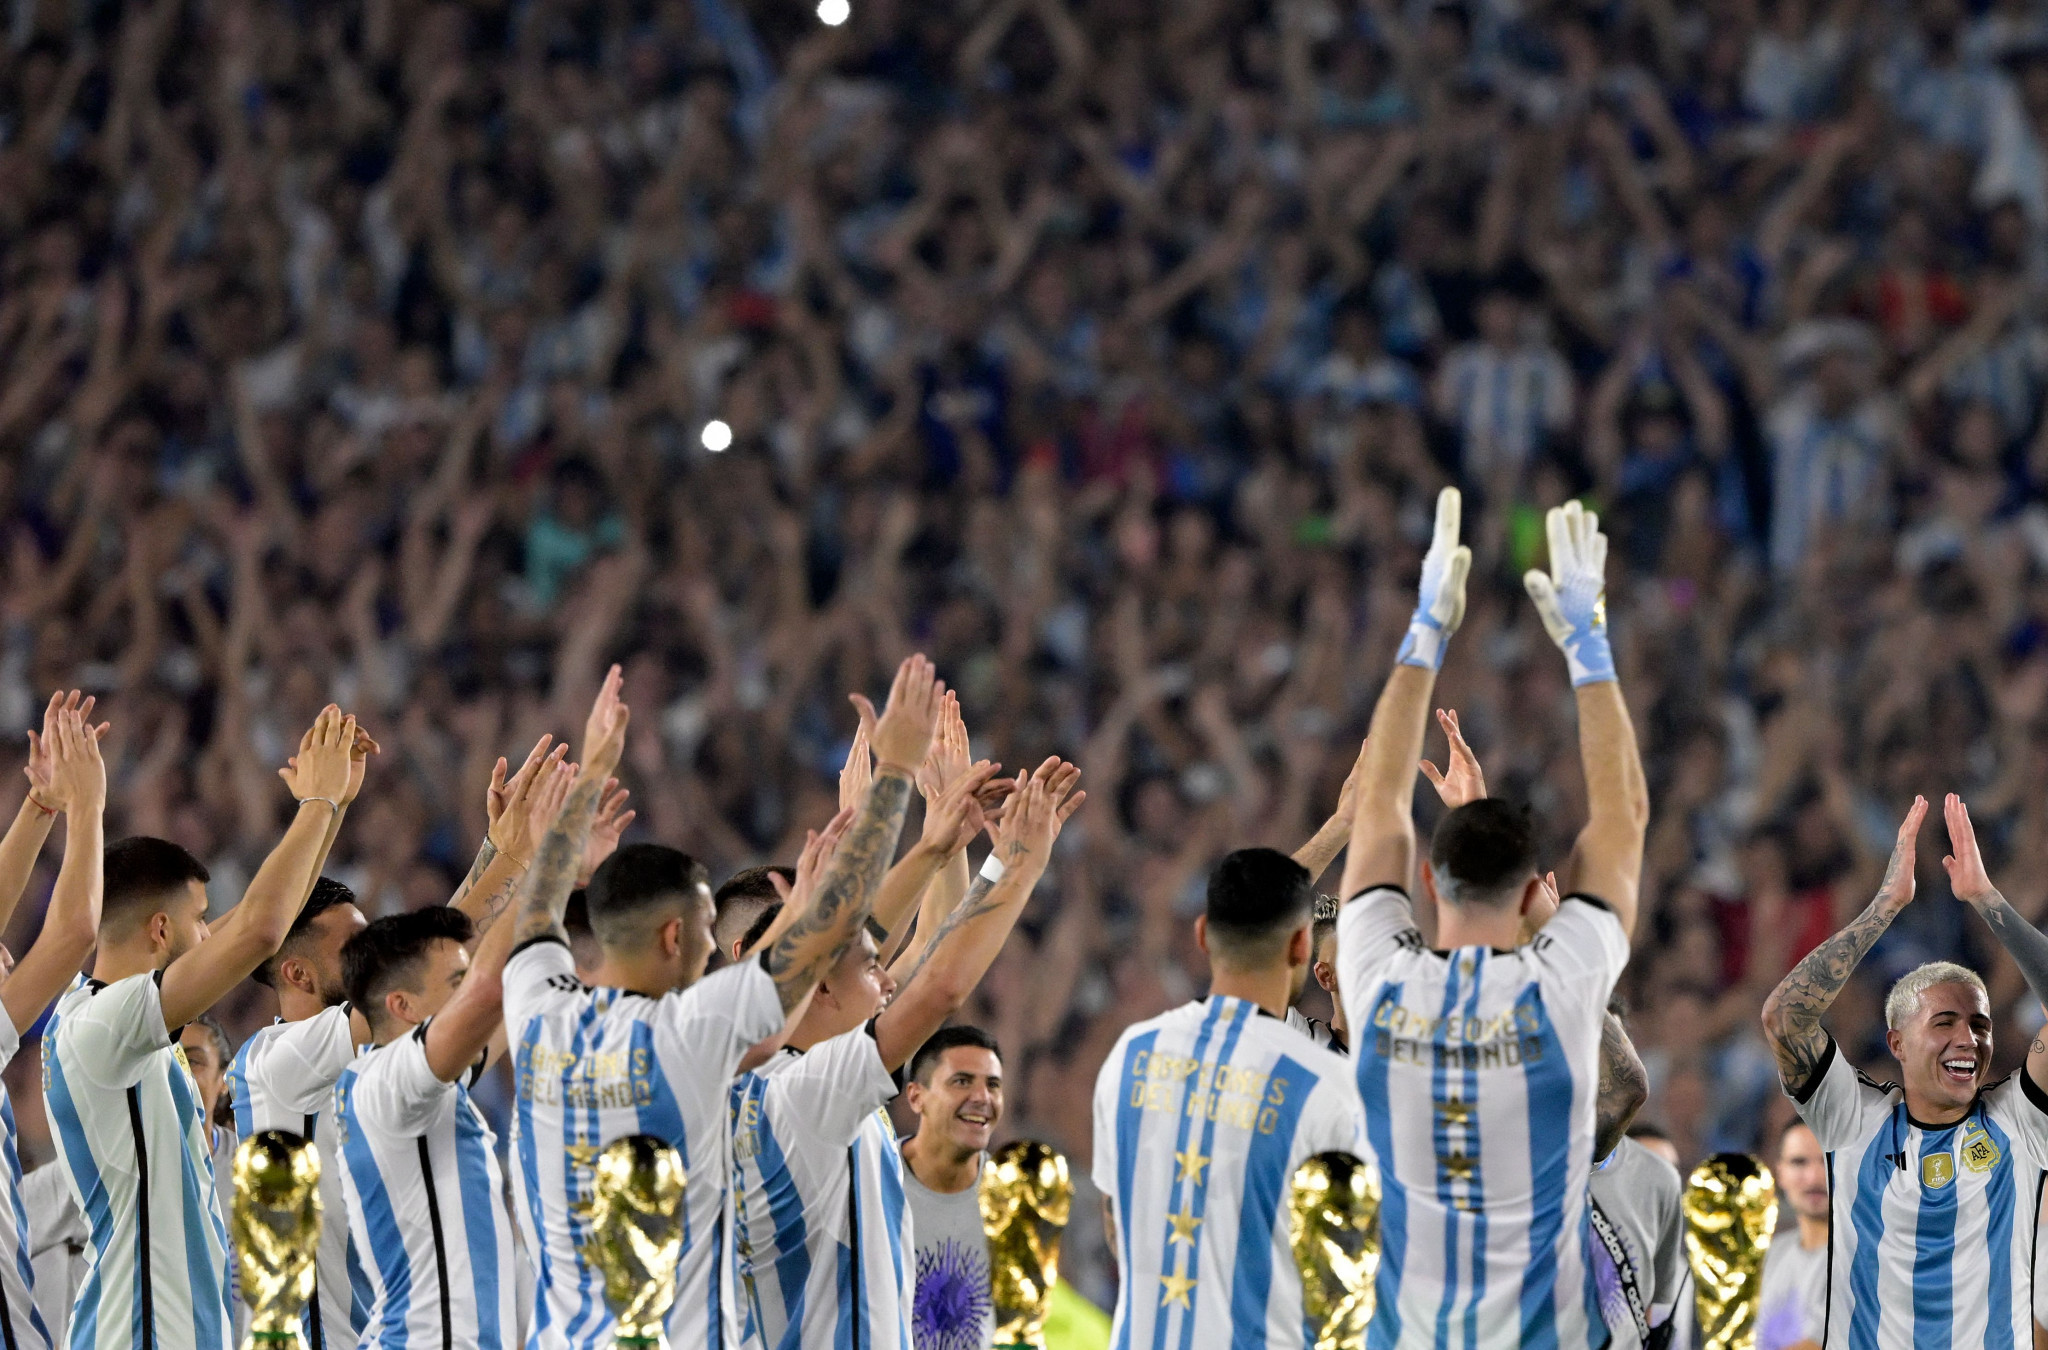 World Cup winners welcomed in Argentina's first match since Qatar 2022